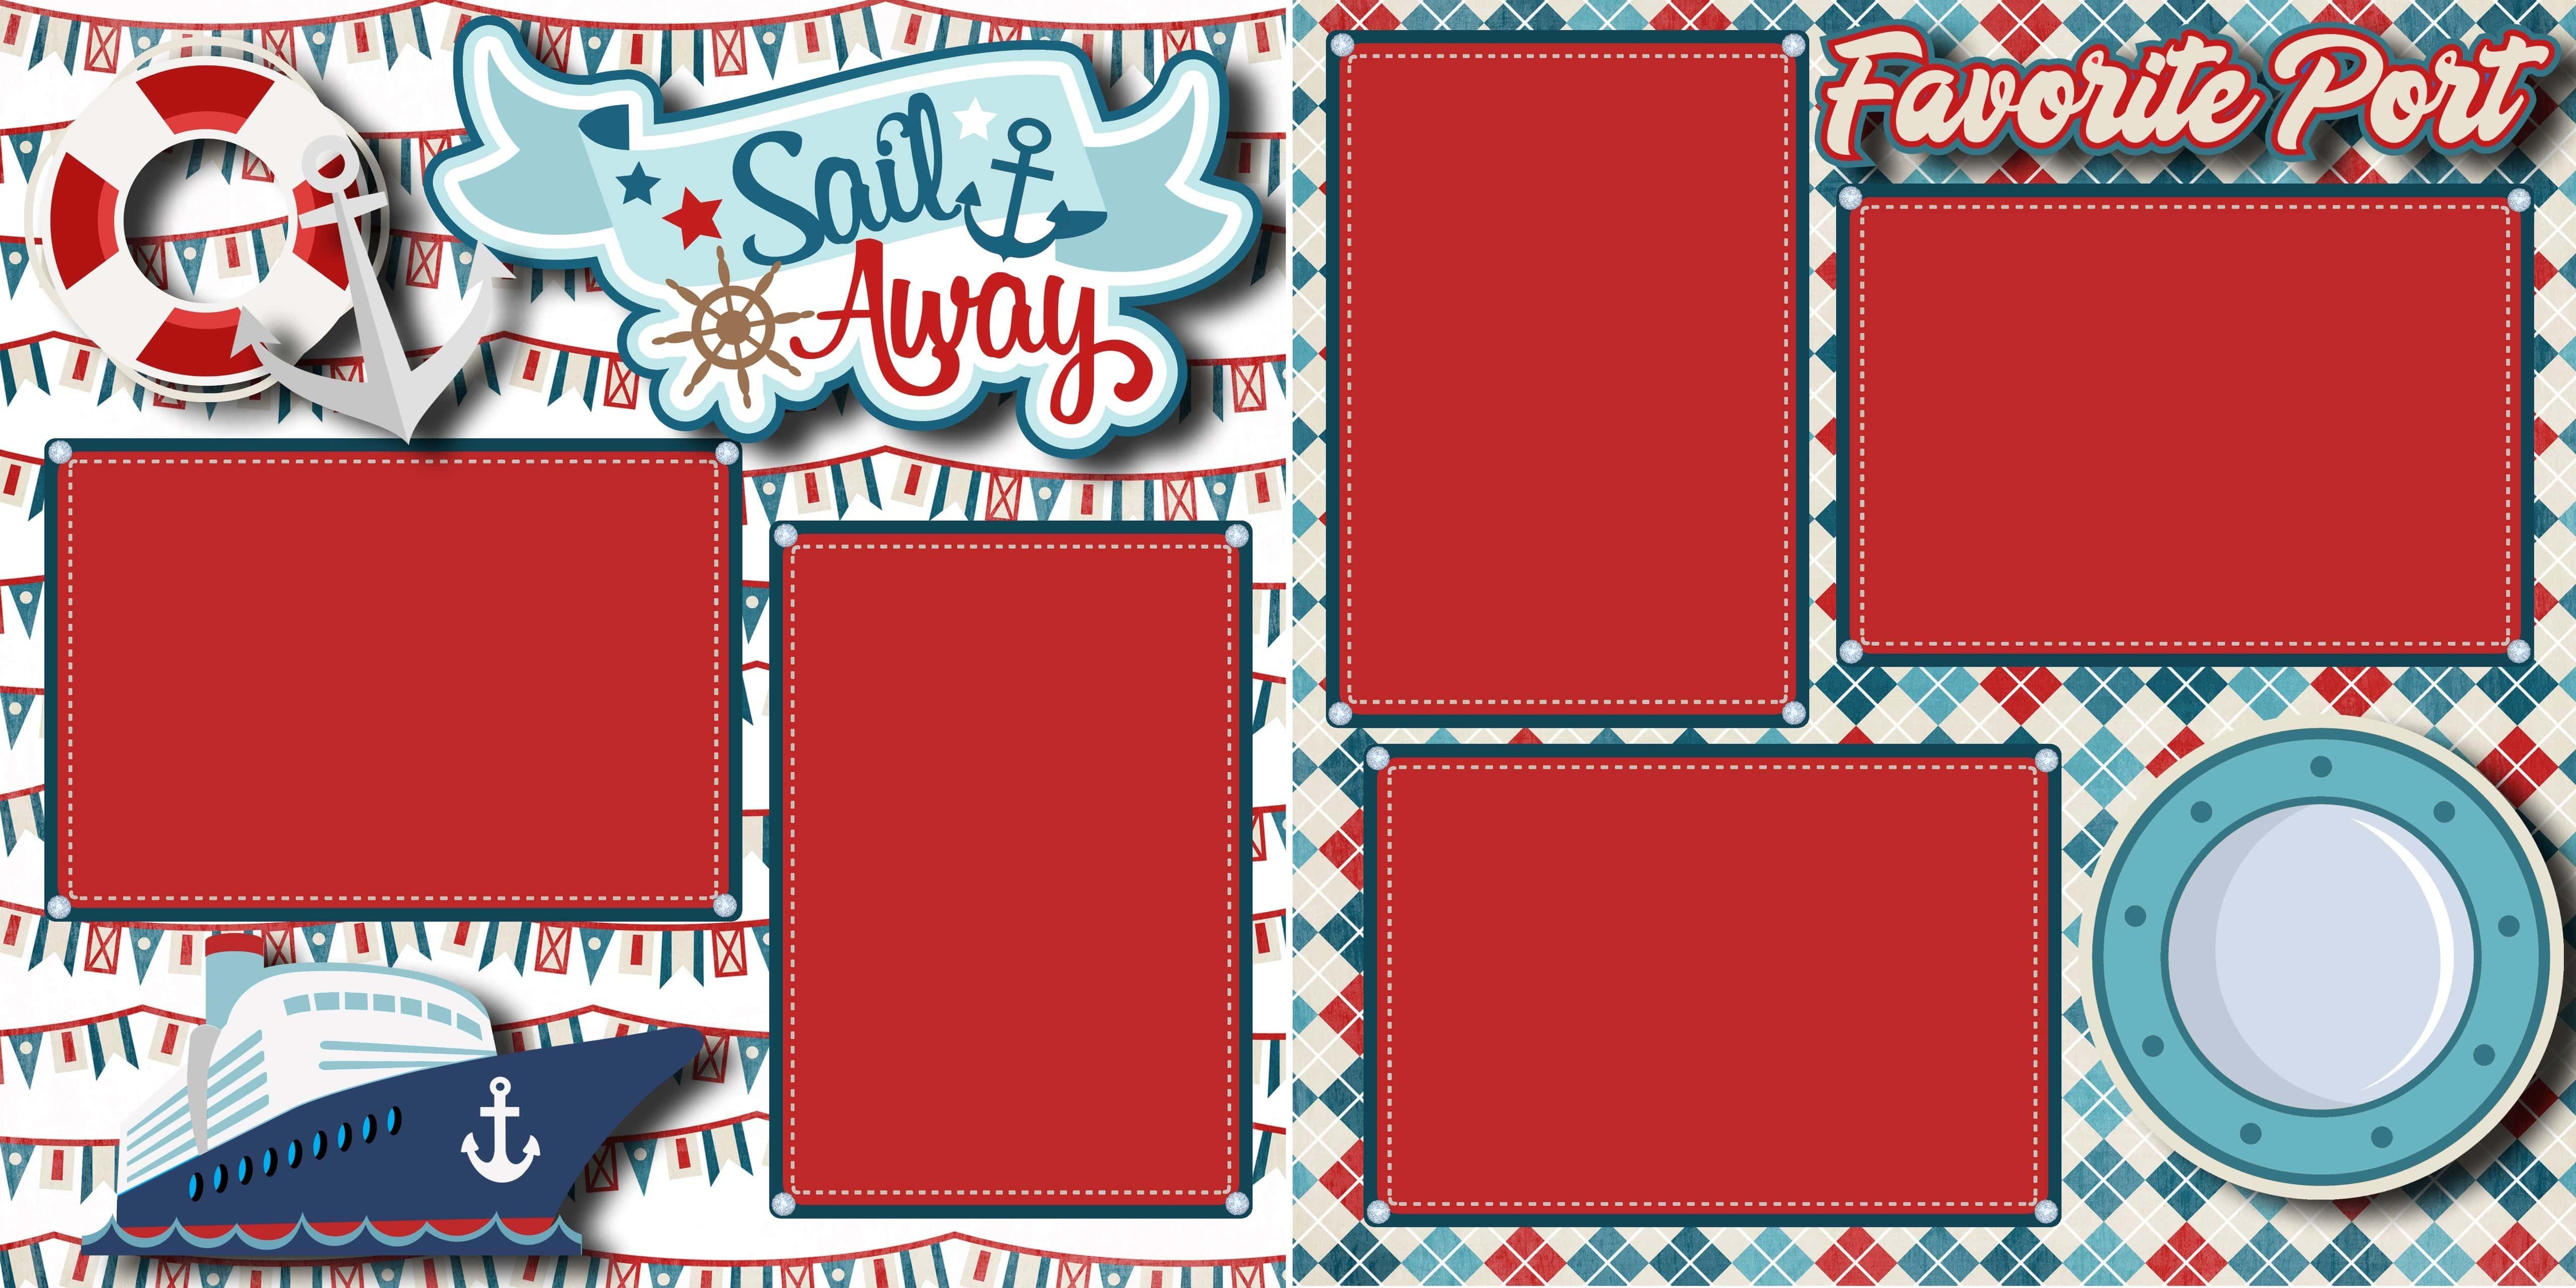 Sail Away (2) - 12 x 12 Premade, Printed Scrapbook Pages by SSC Designs - Scrapbook Supply Companies